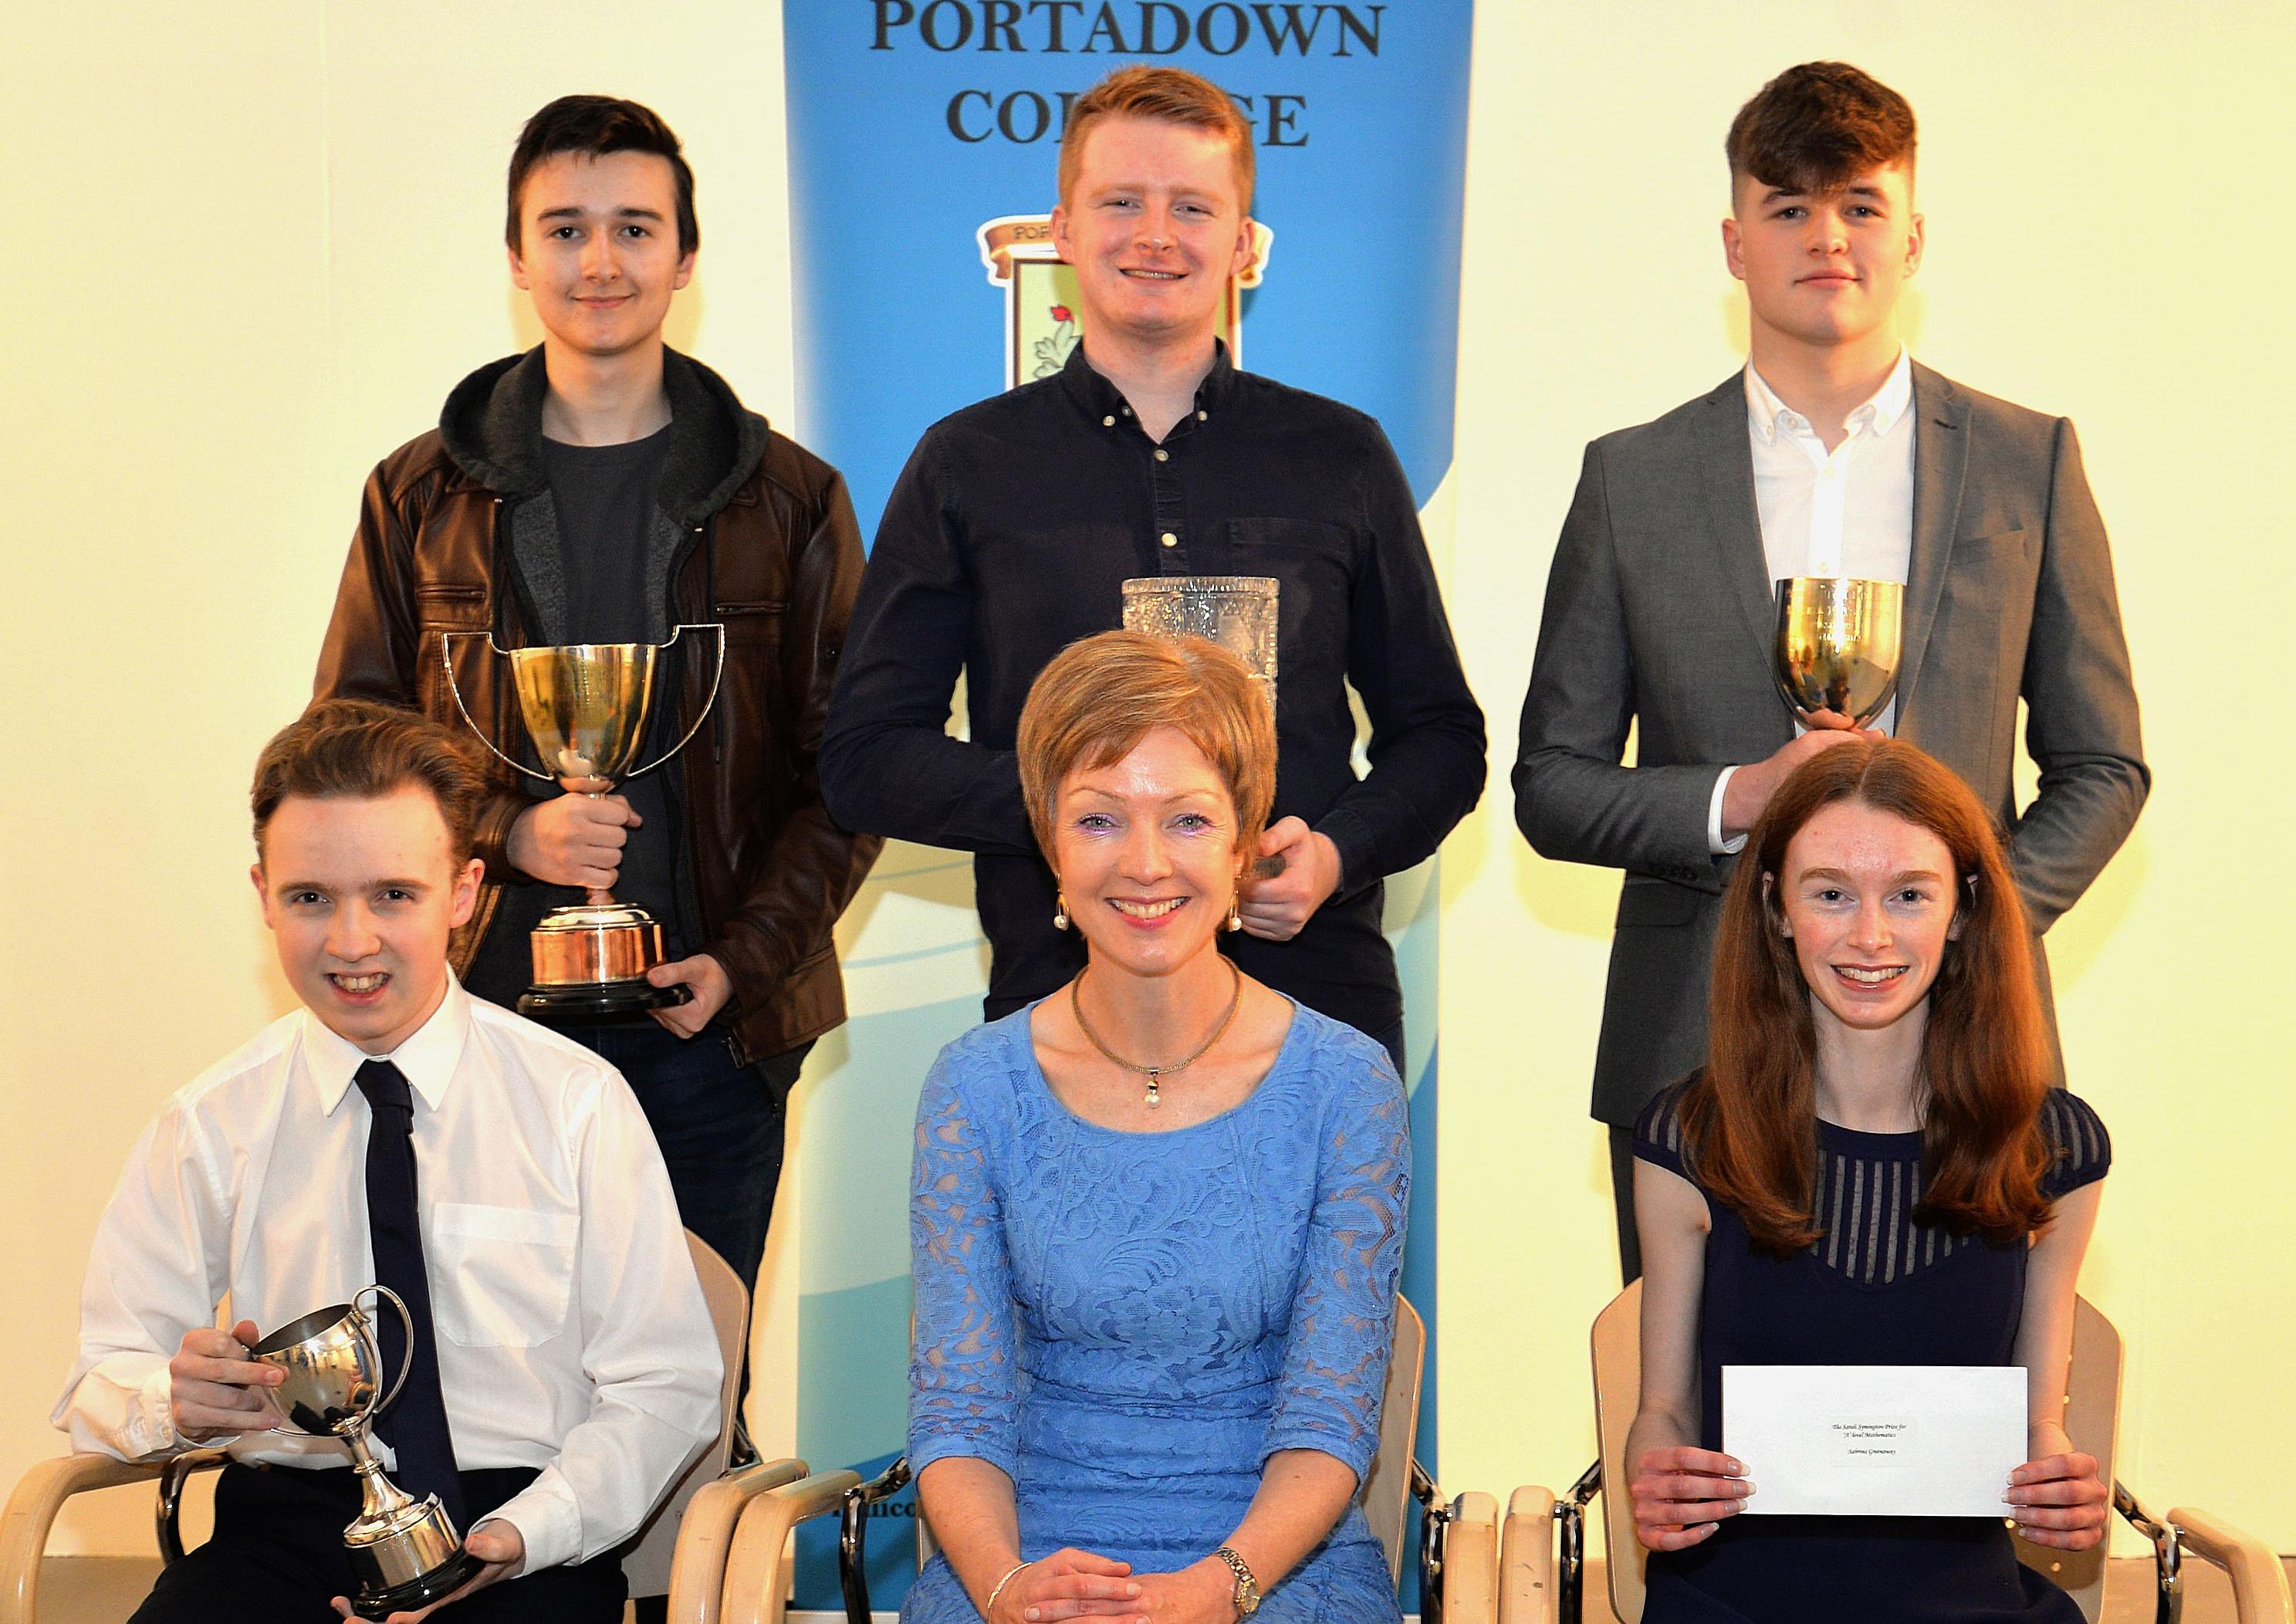 Vice principal, Miss Gillian Gibb pictured with 'A' level subject prize winners including back row from left, Zach Cairns, Technology, Timothy Hunter, Computing, and David May, Physics. Front from left, Nye Crozier, Politics, and Sabrina Greenaway, English and Maths. INPT44-220.